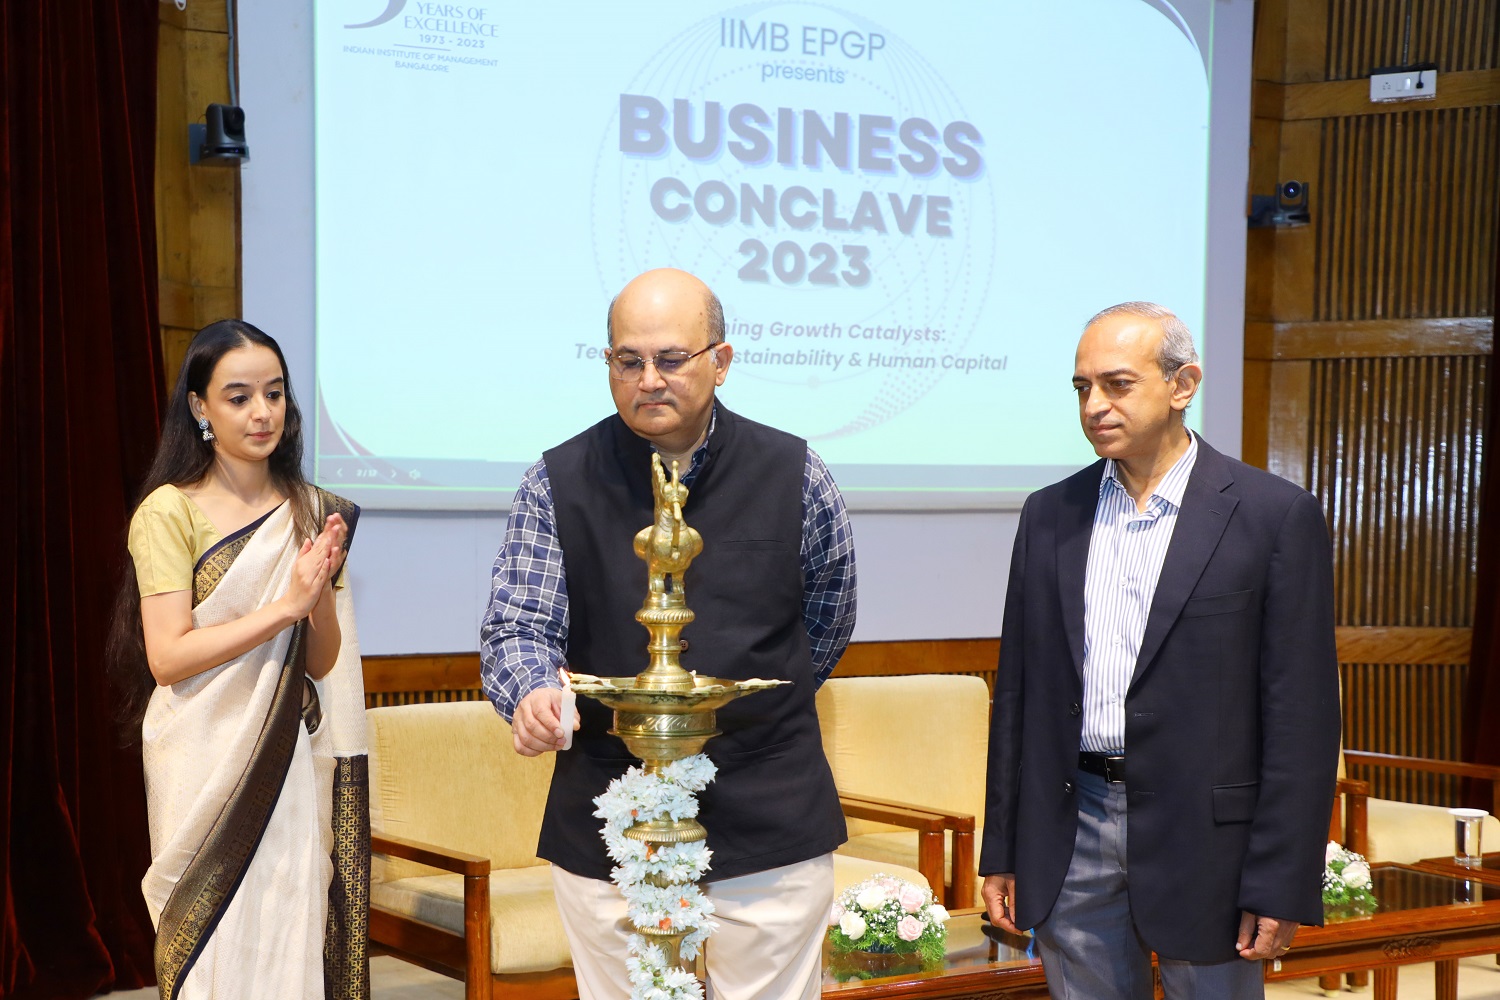 Professor Rishikesha T. Krishnan, Director of IIM Bangalore, lights the ceremonial lamp to inaugurate the EPGP Business Conclave 2023, organized by the Executive Post Graduate Programme in Management (EPGP) at IIMB, the event focuses on 'Unleashing Growth Catalysts: Technology, Sustainability & Human Capital' on 24th September.